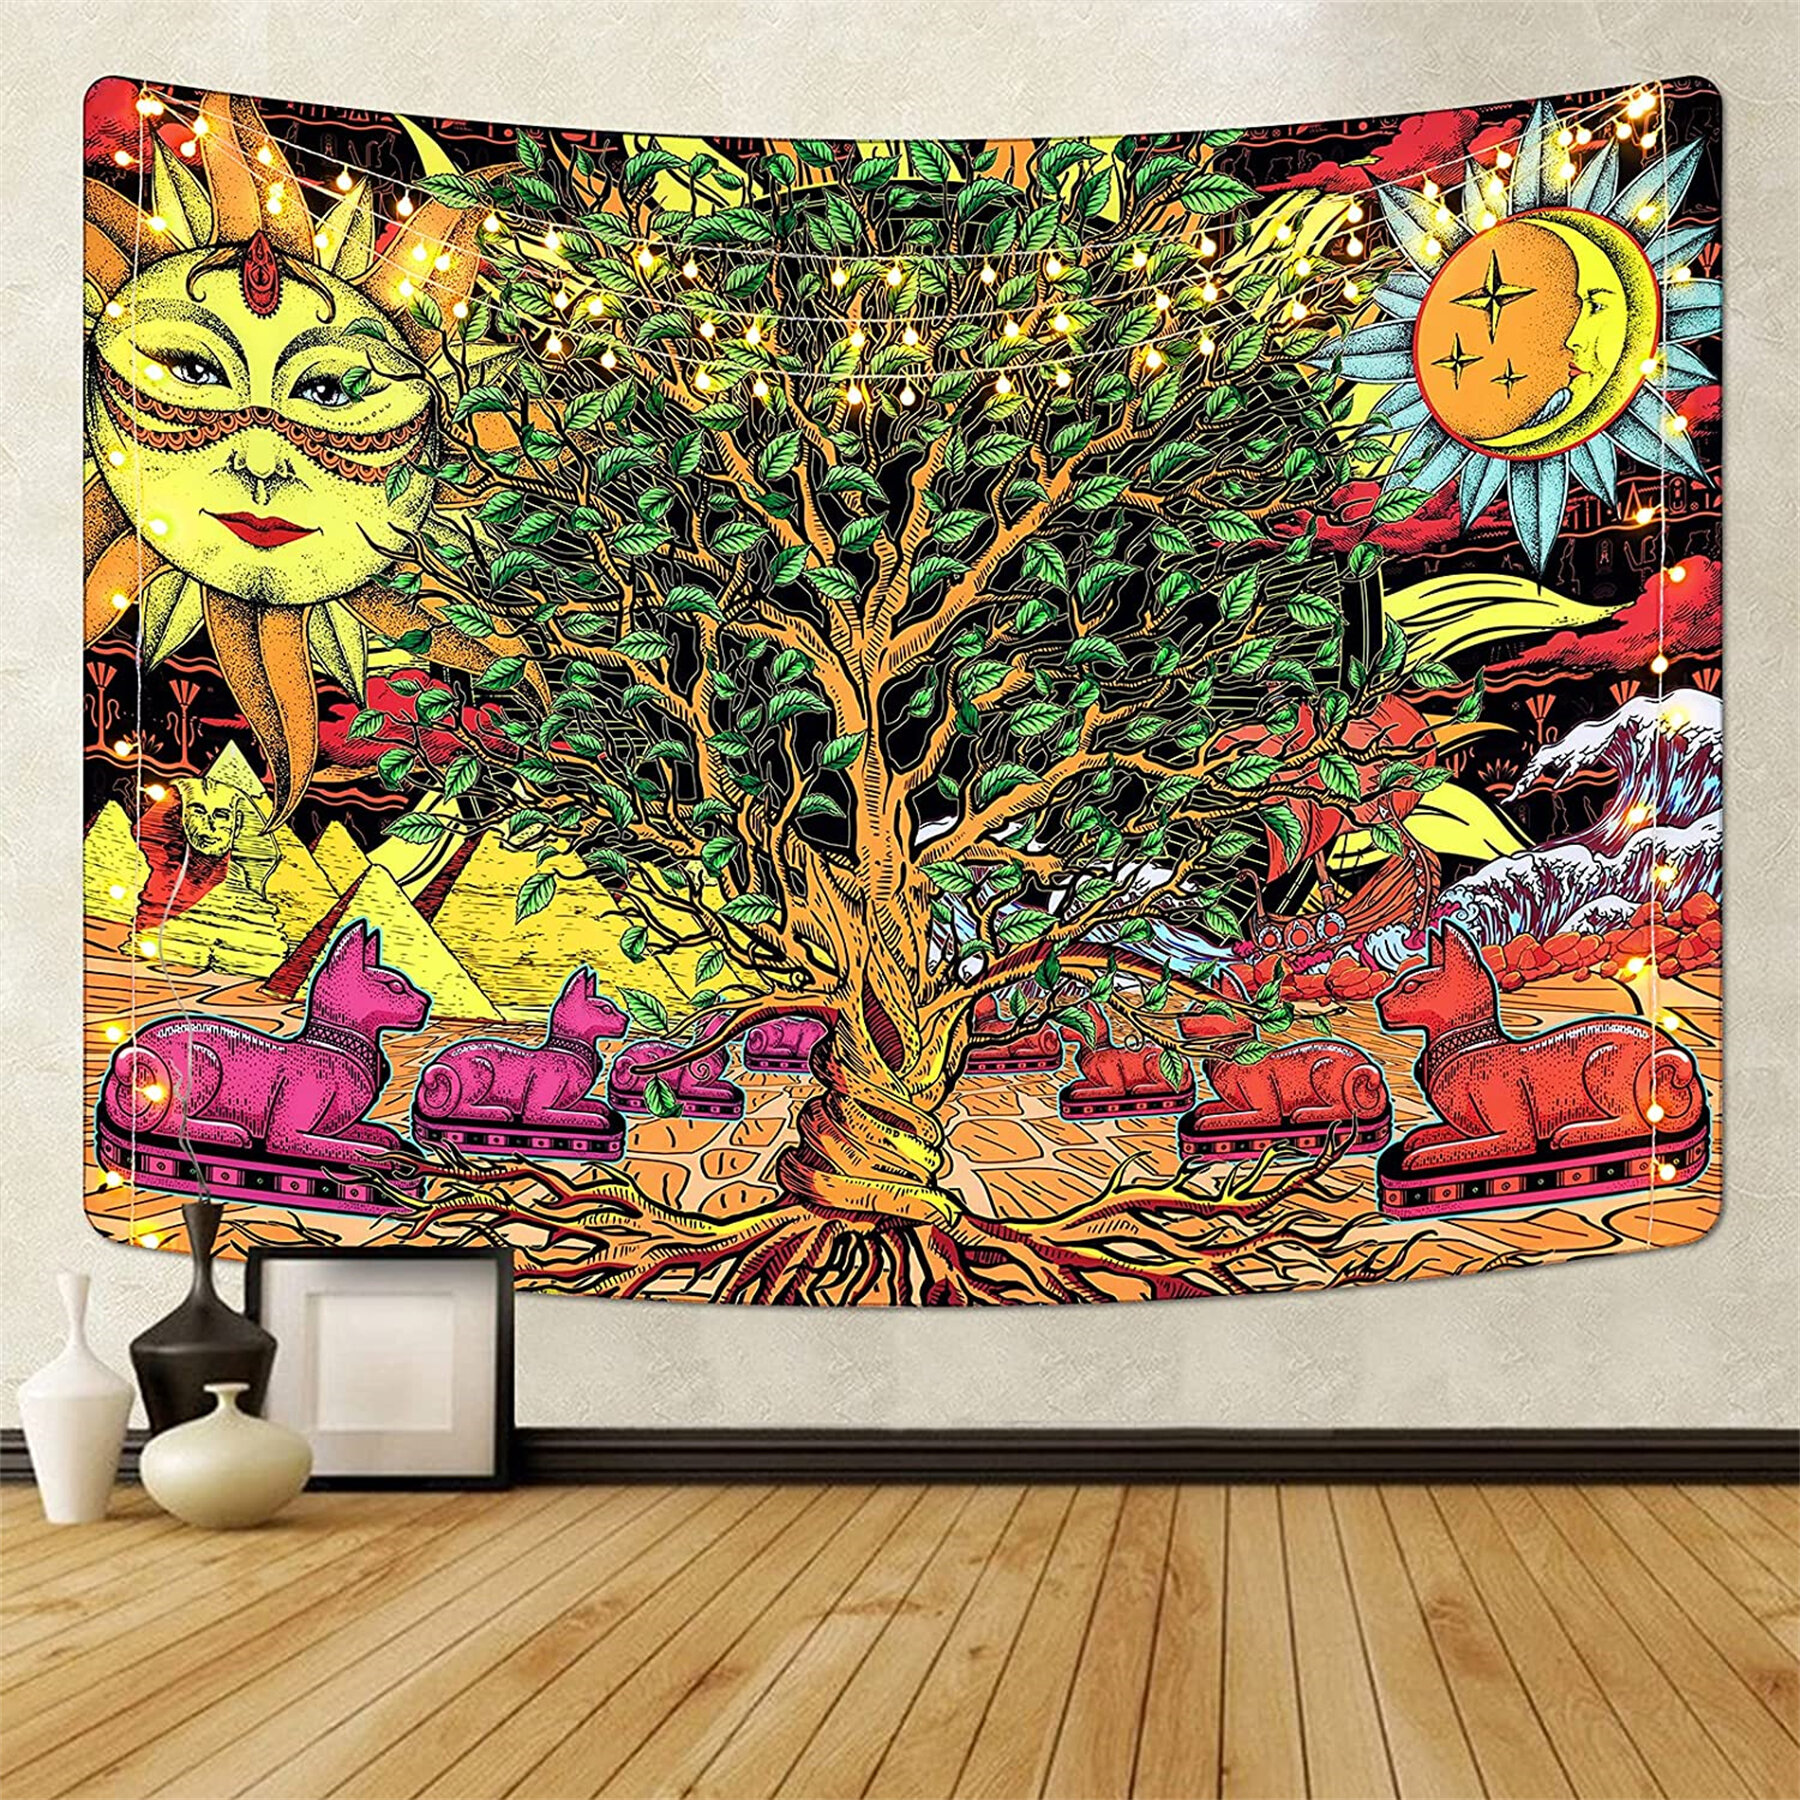 Tree Tranquility Wall Hanging Tapestry Psychedelic Bedroom Home Decoration 